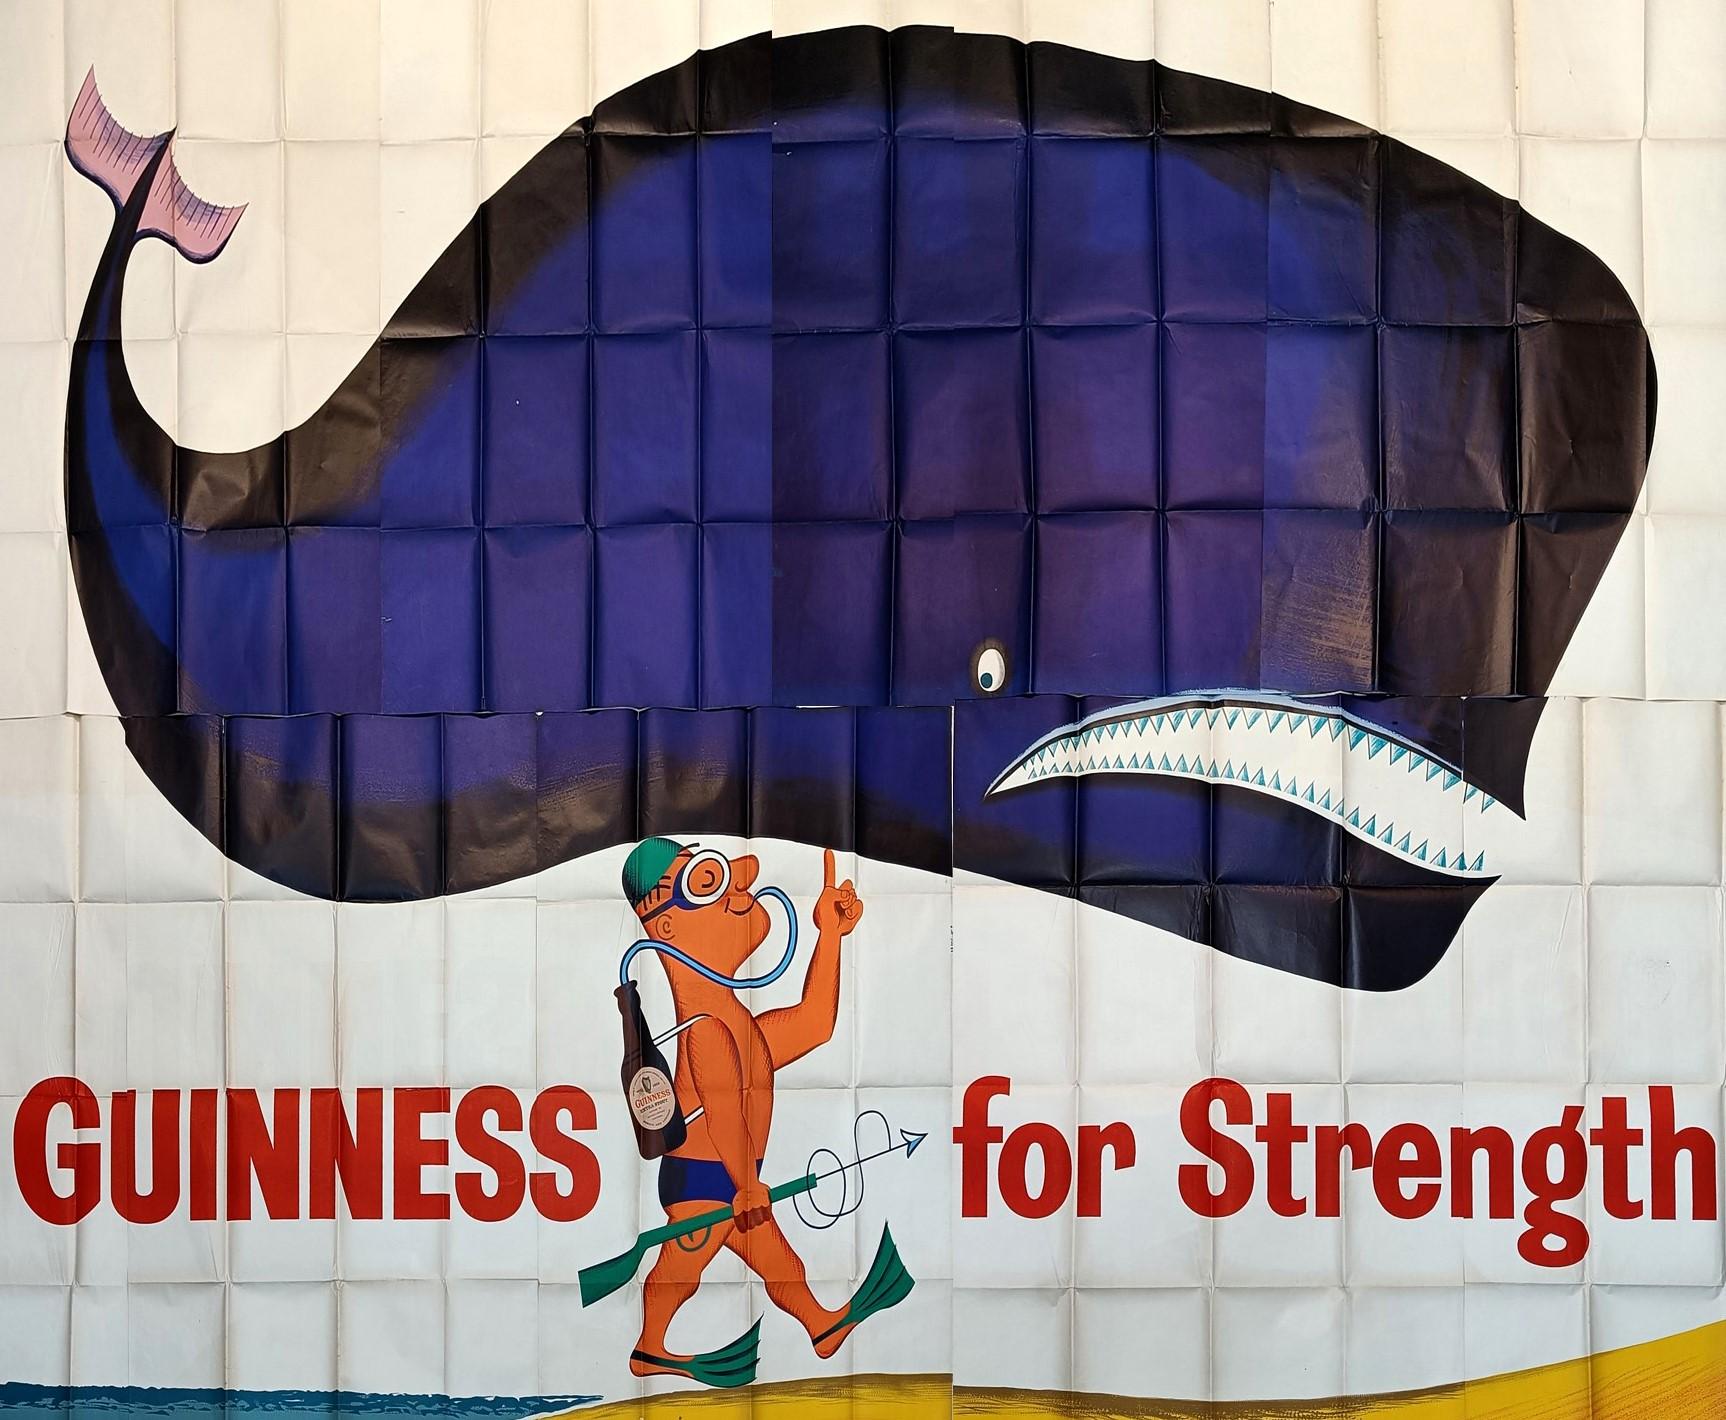 Rare billboard size original vintage Guinness advertising poster - Guinness for Strength - featuring fun mid-century modern image of a scuba diver with a Guinness bottle as his dive tank holding a blue whale on one finger, the text in bold red